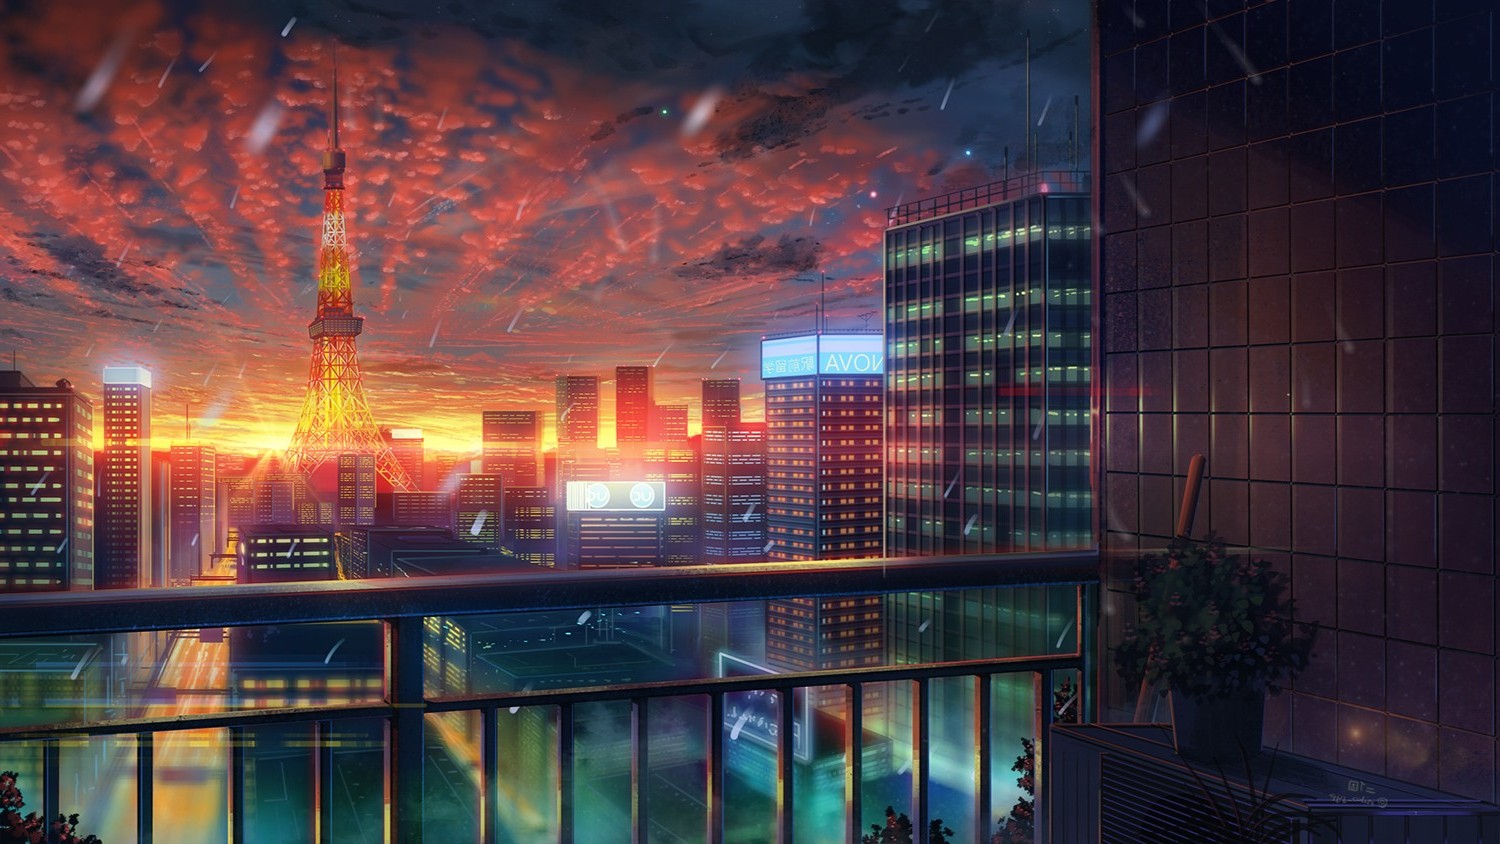 Anime Girl In Balcony Cityscape Sea And Sunset Wallpapers